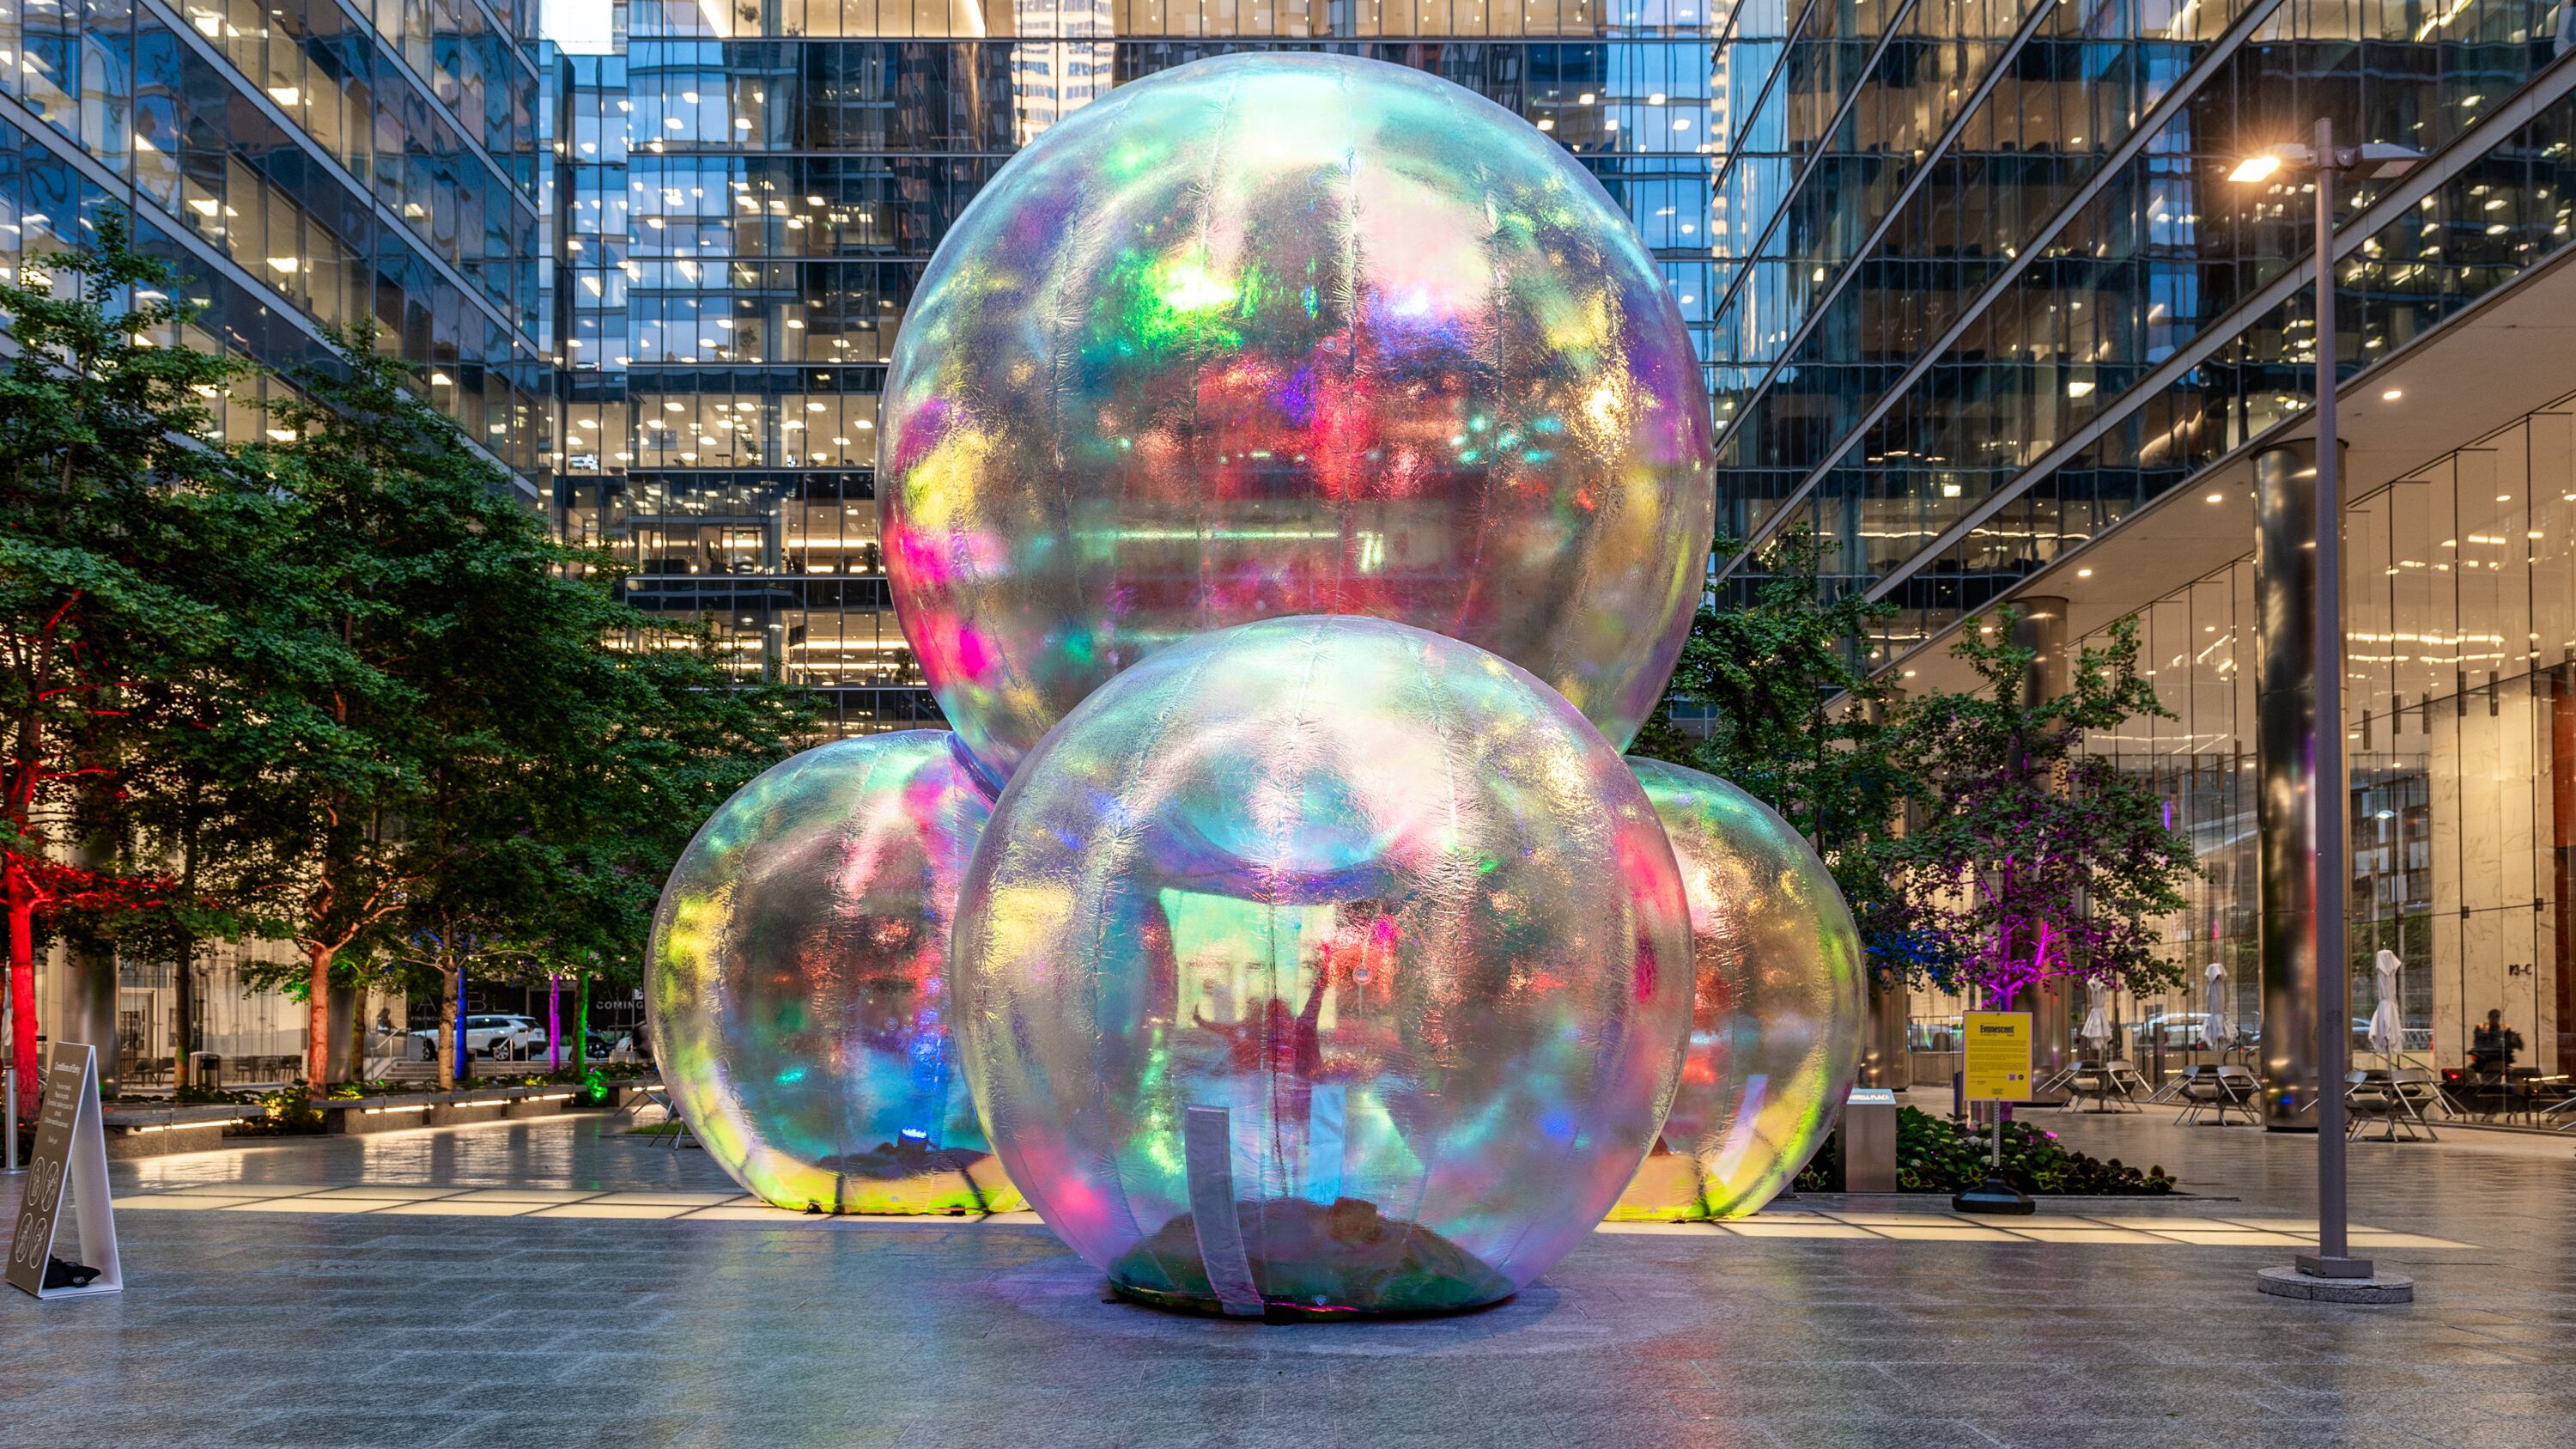 A temporary immersive bubble-tecture in a courtyard at dusk